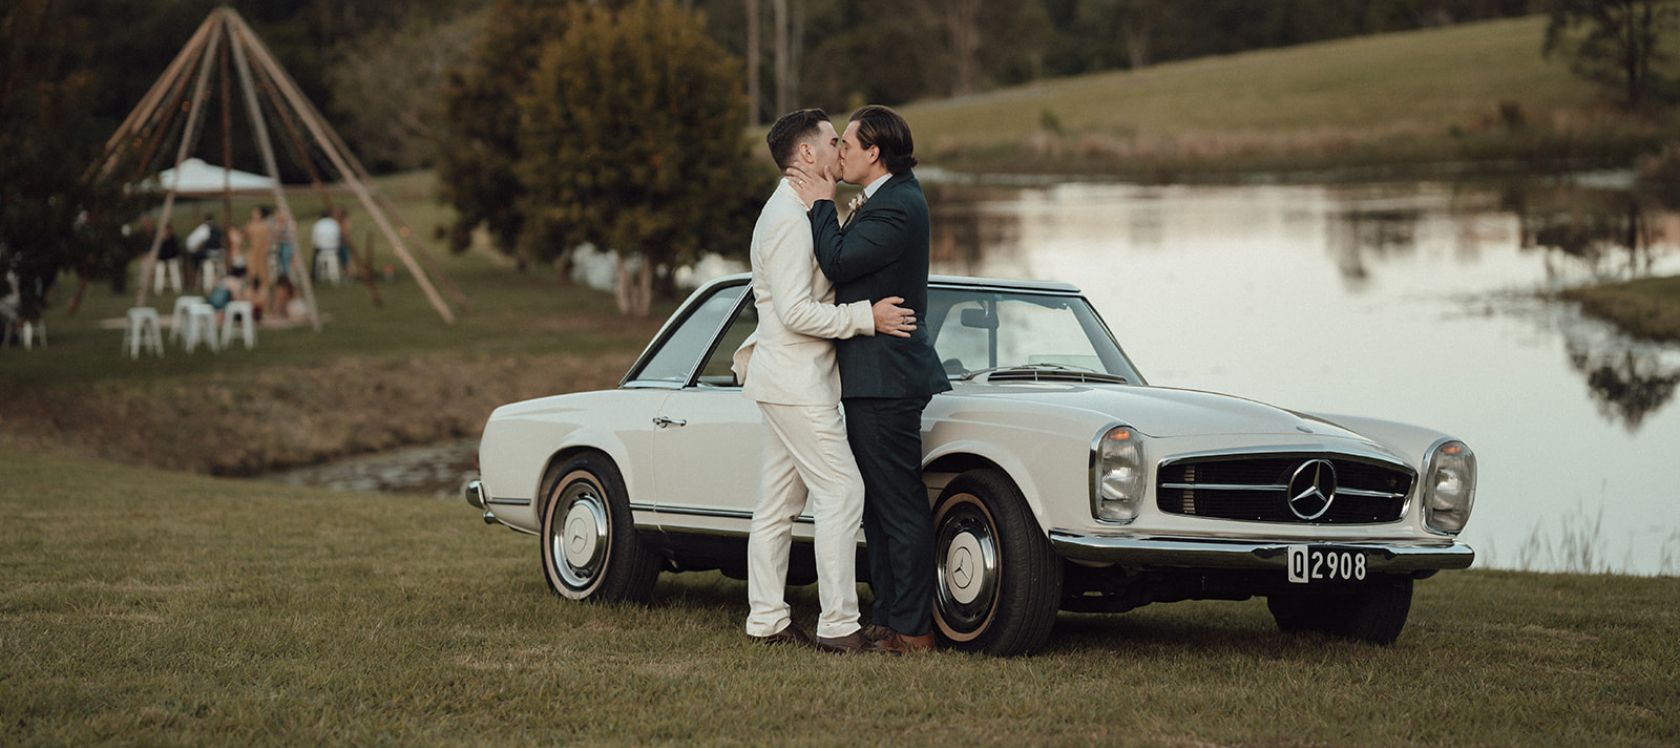 Newly wed grooms kiss by a vintage Mercedes against a lake and forest